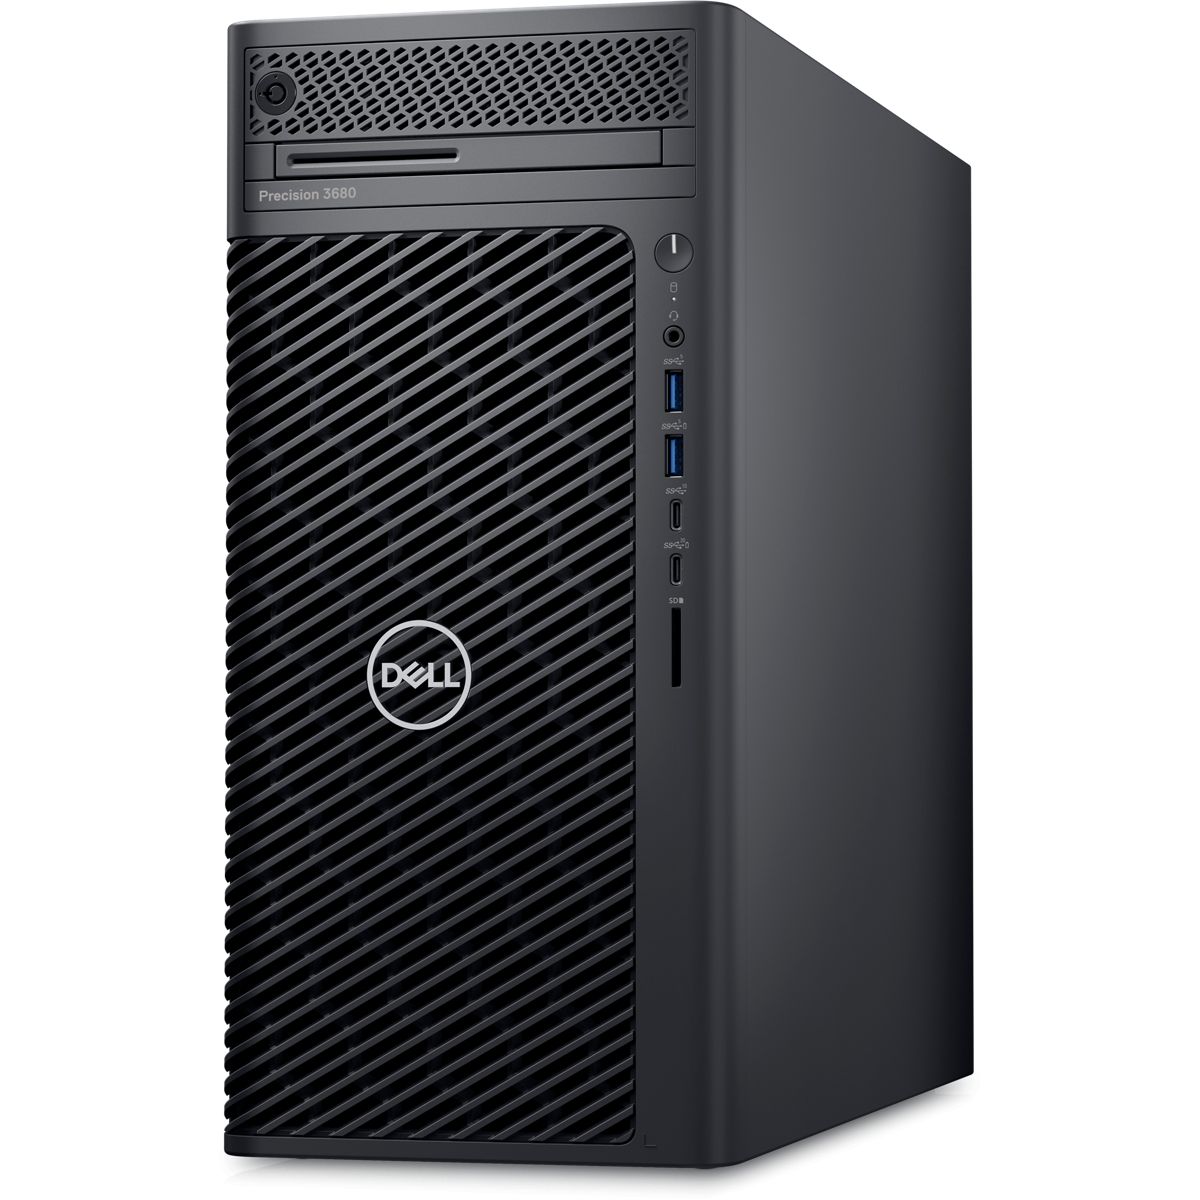 Dell Precision 3680 Tower,Intel Core i7-14700K(33MB,20Cores,28threads,3.4GHz/5.6GHz),32GB(2x16)4400MT/s DDR5,512GB(M.2)NVMe PCIe SSD,2TB(3.5)HDD 7200rpm,Nvidia T1000/8GB,noWi-Fi,Dell Mouse-MS116,Dell Keyboard-KB216,Win11Pro,3Yr NBD_2